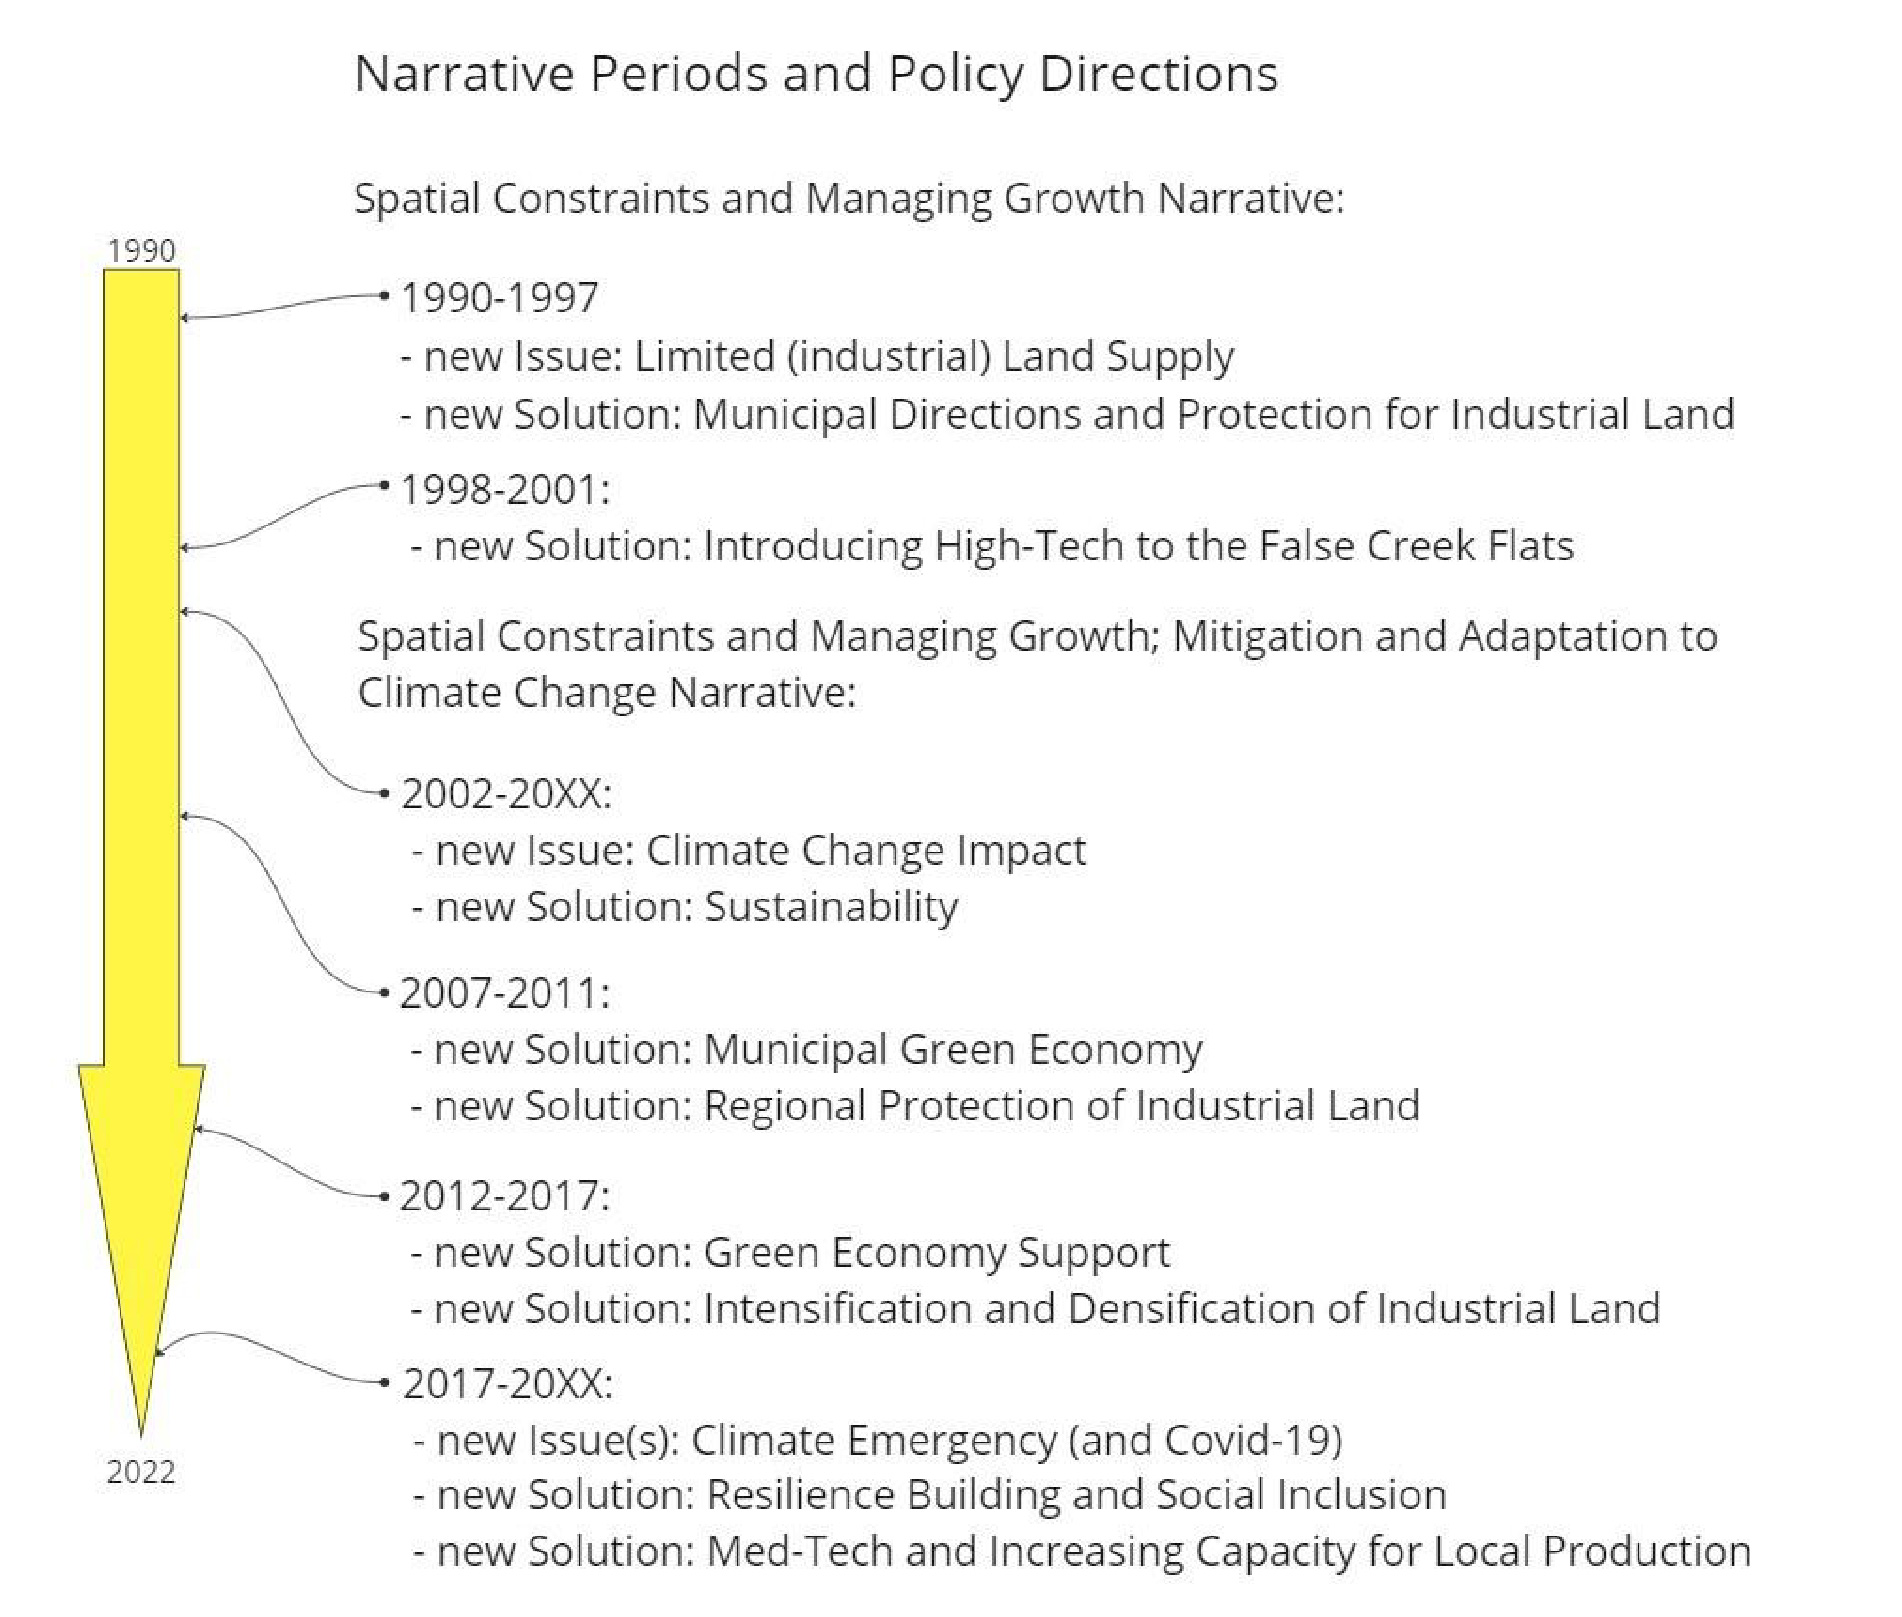 Figure 2 is showing a period overview on the narratives and policy directions from 1990 till 2022 in the area. For each period issues as well as solutions are listed.